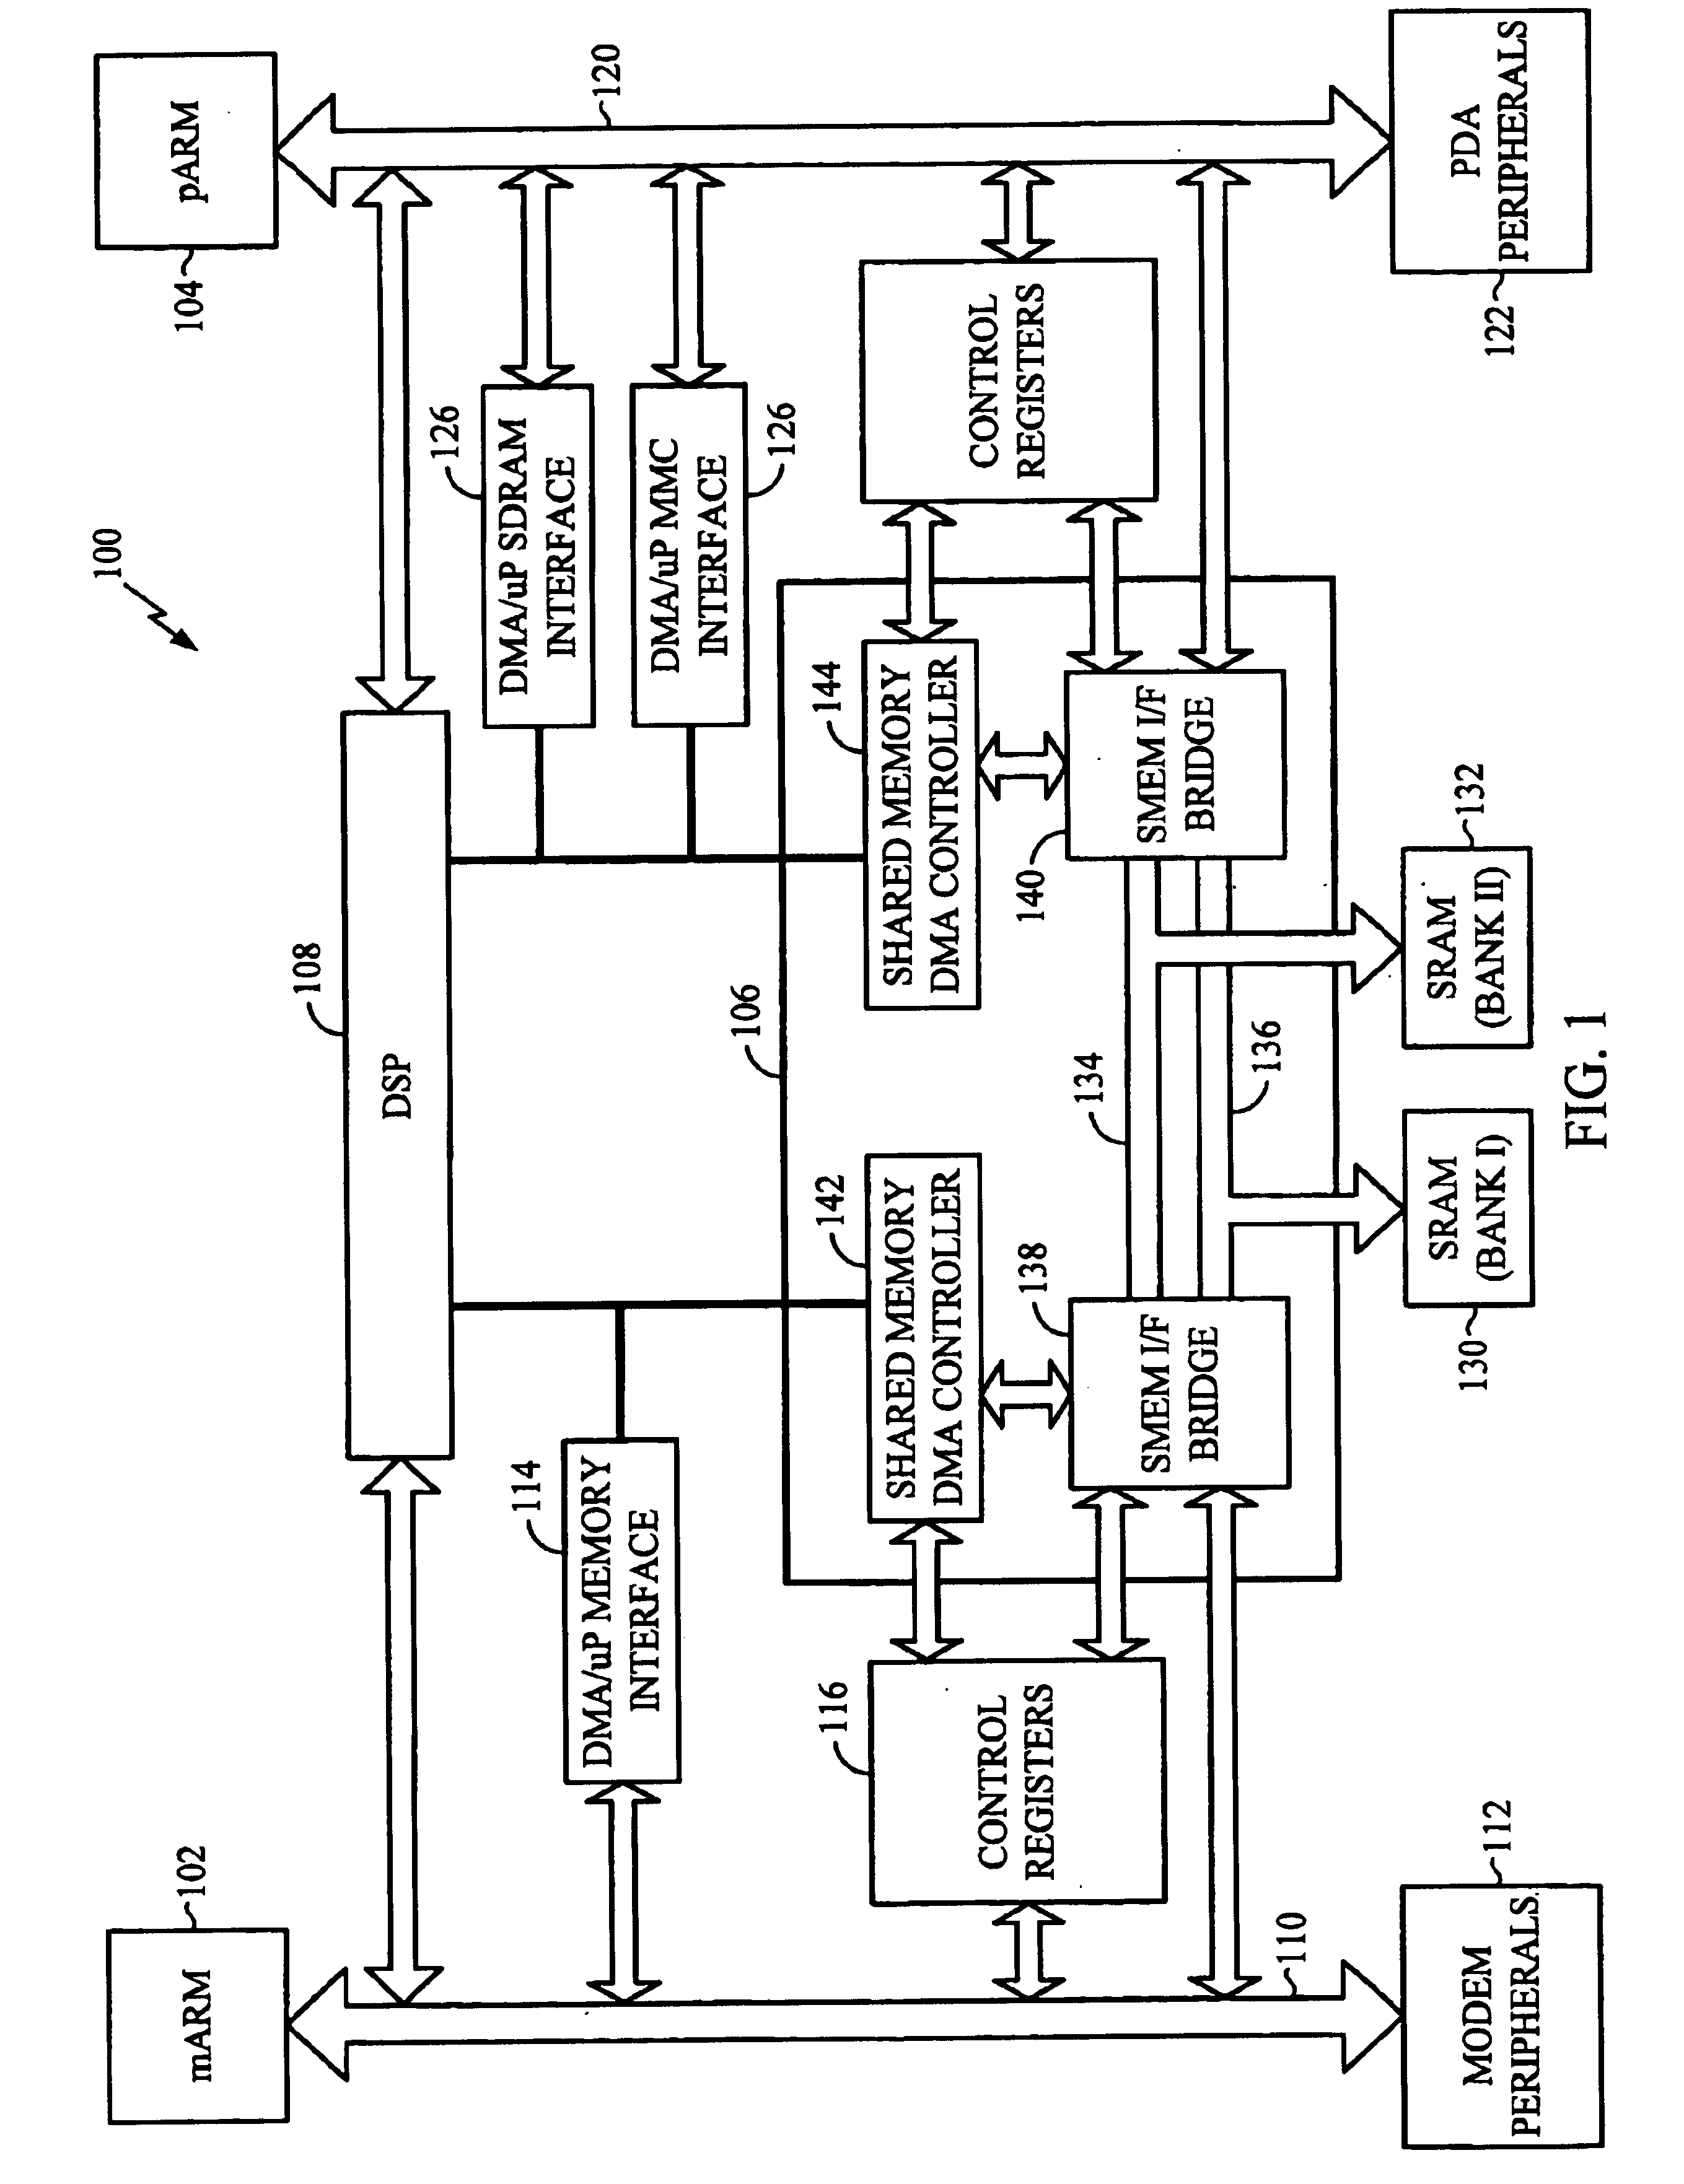 Mobile communication device having dual micro processor architecture with shared digital signal processor and shared memory